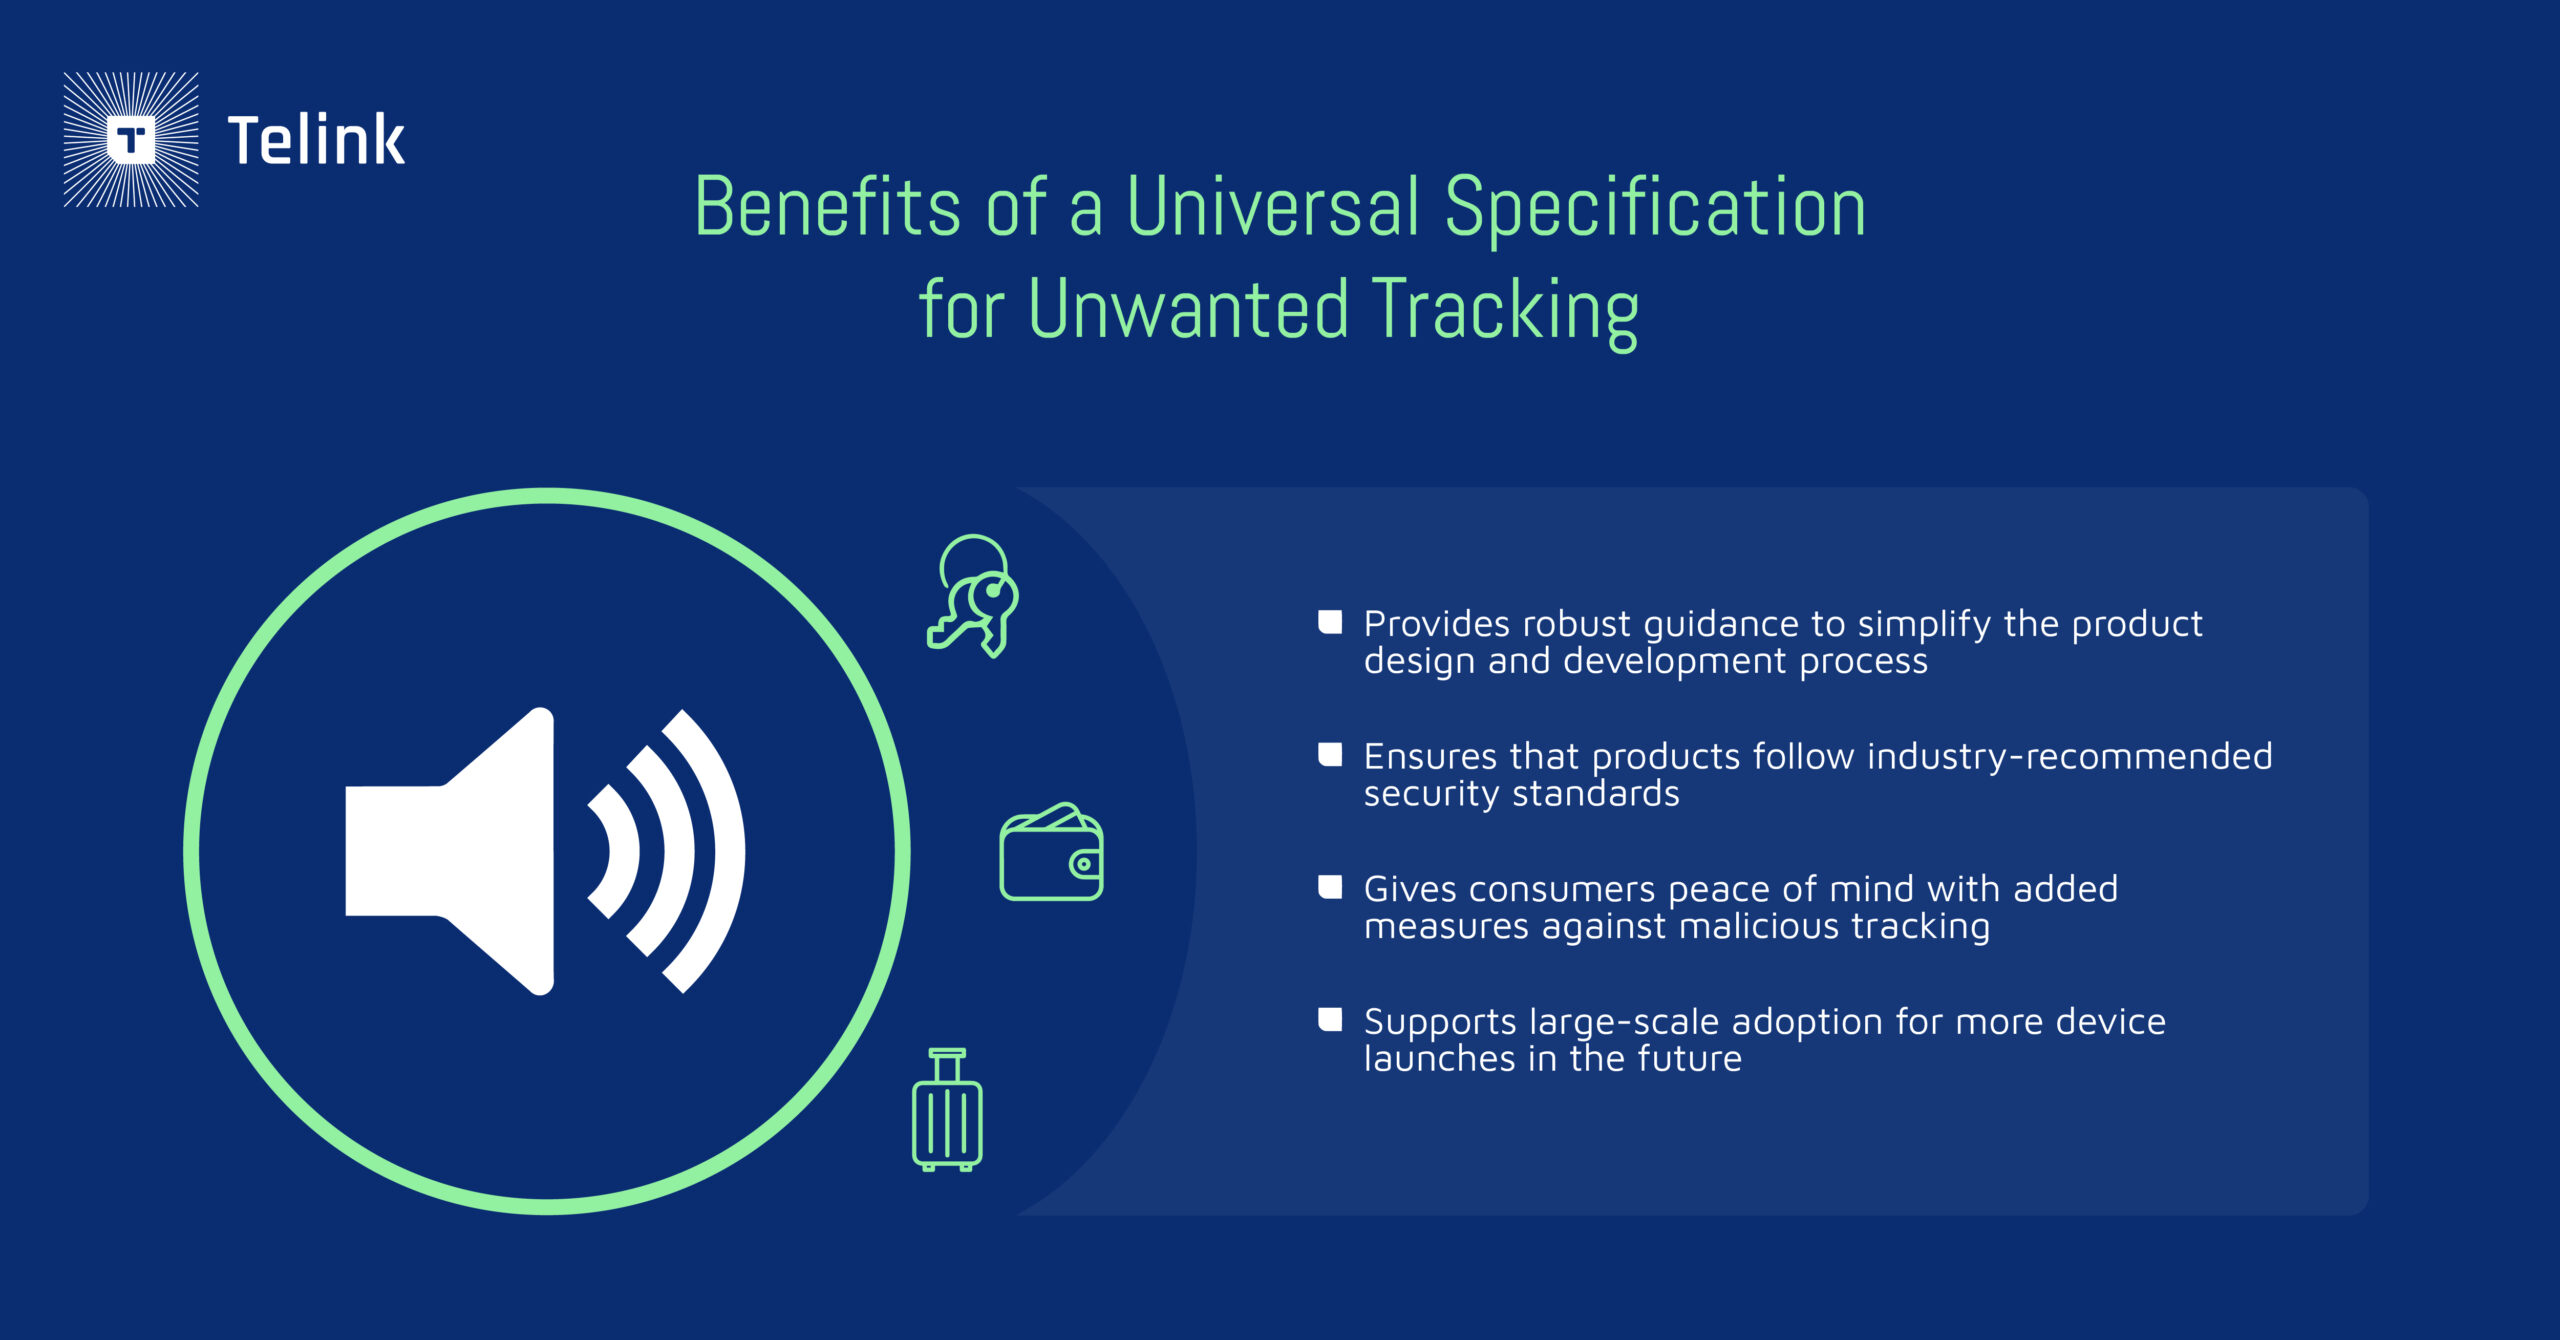 Benefits of a Universal Specification for Unwanted Tracking